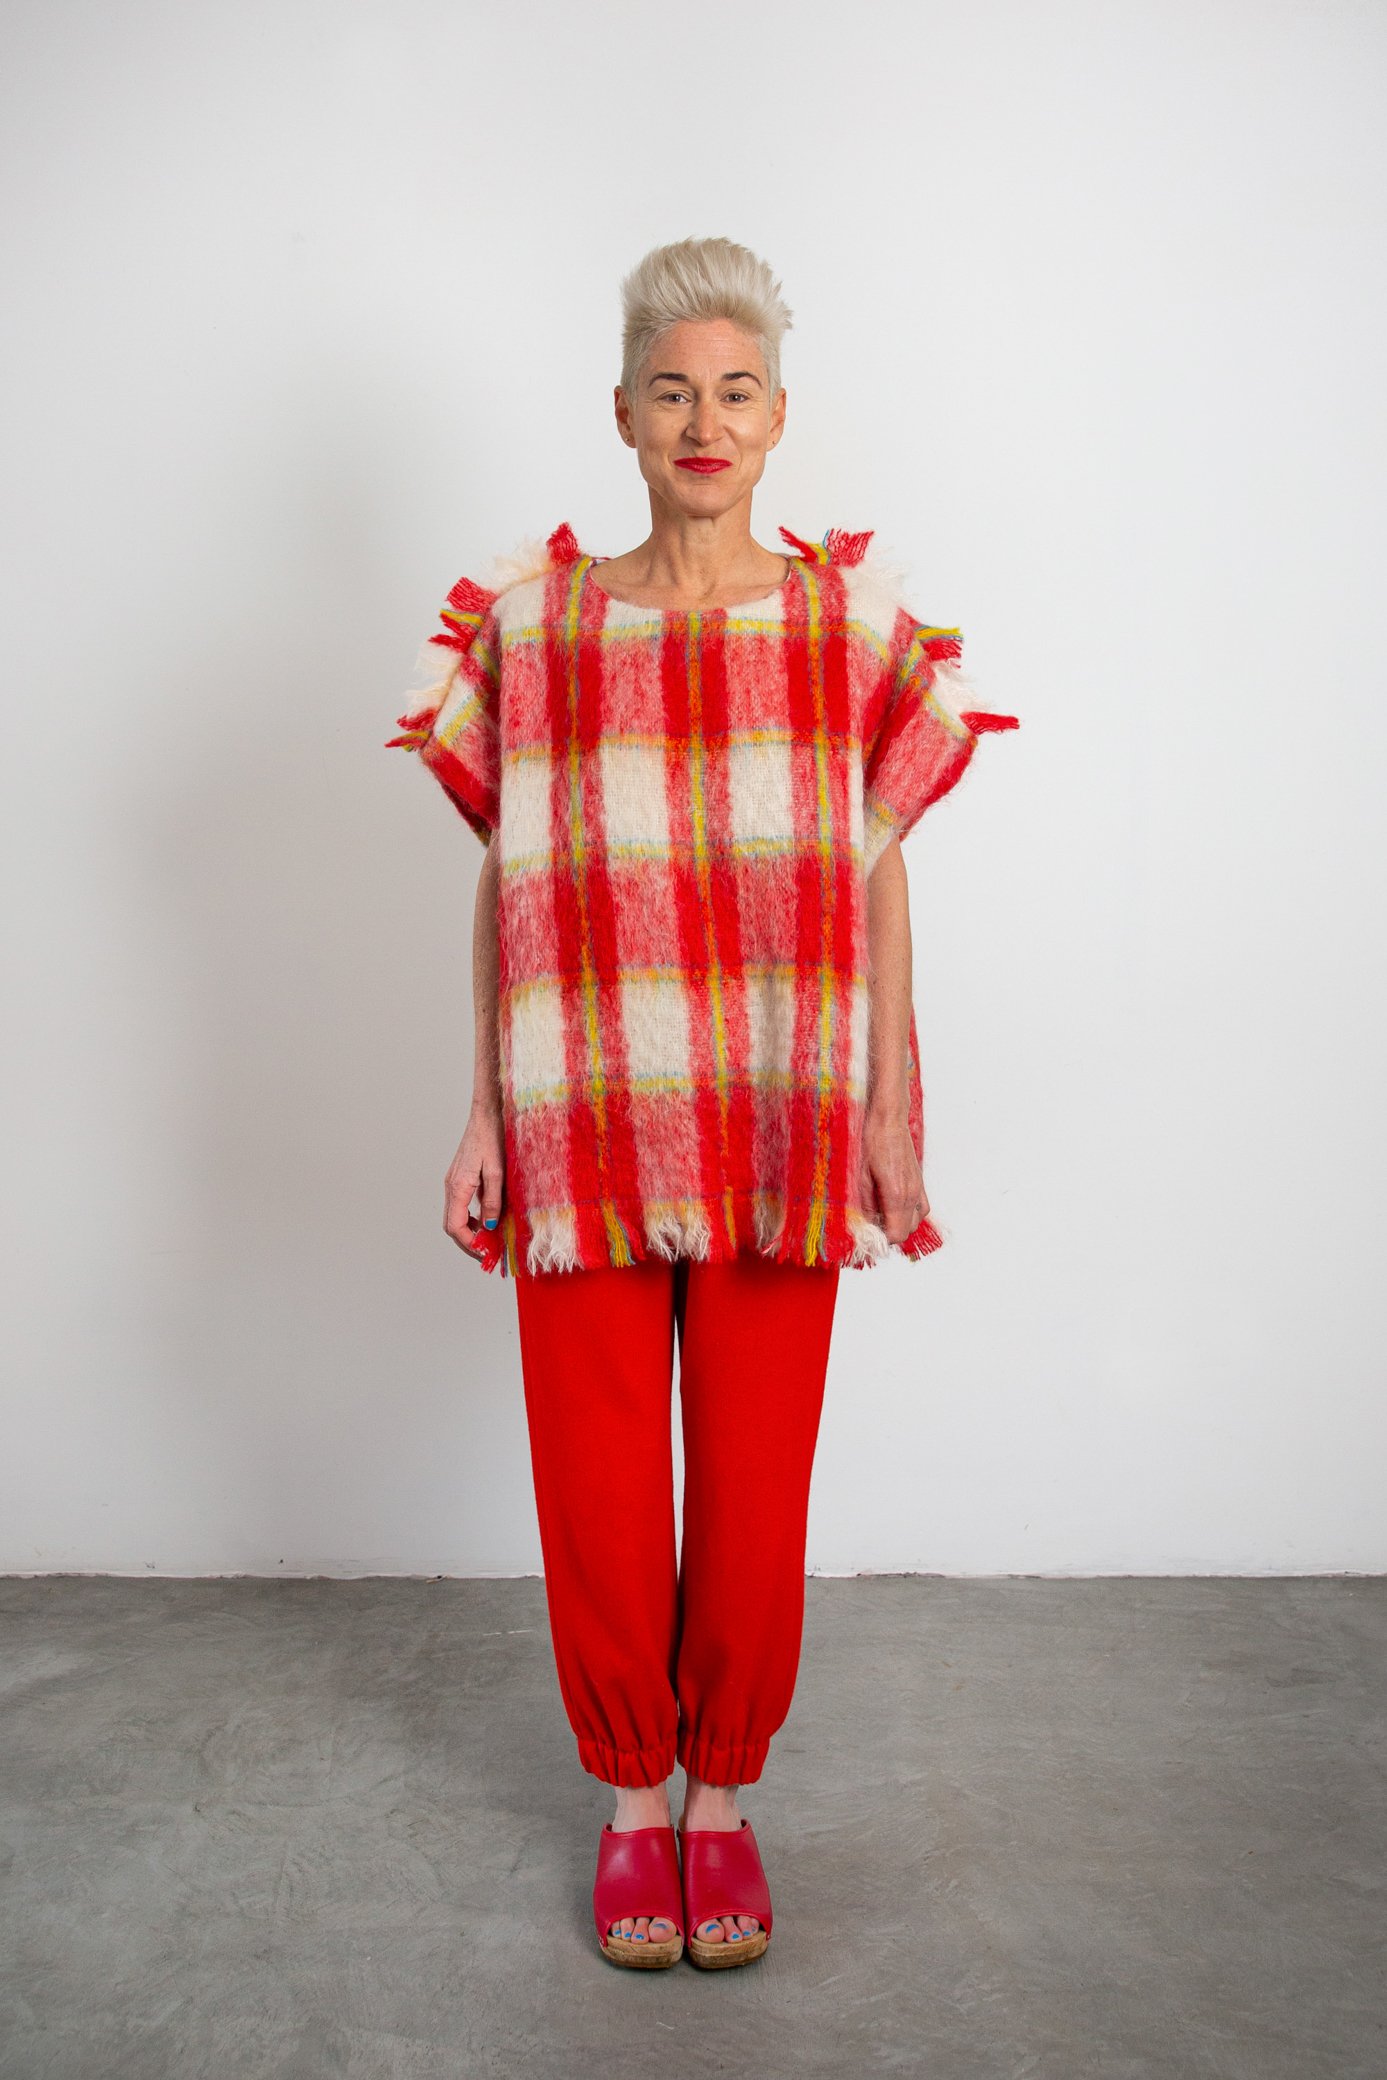 Aoibheann modelling The Tweed Project_s Red _ White Tartan Tassled Smock Top With Tassles.jpg